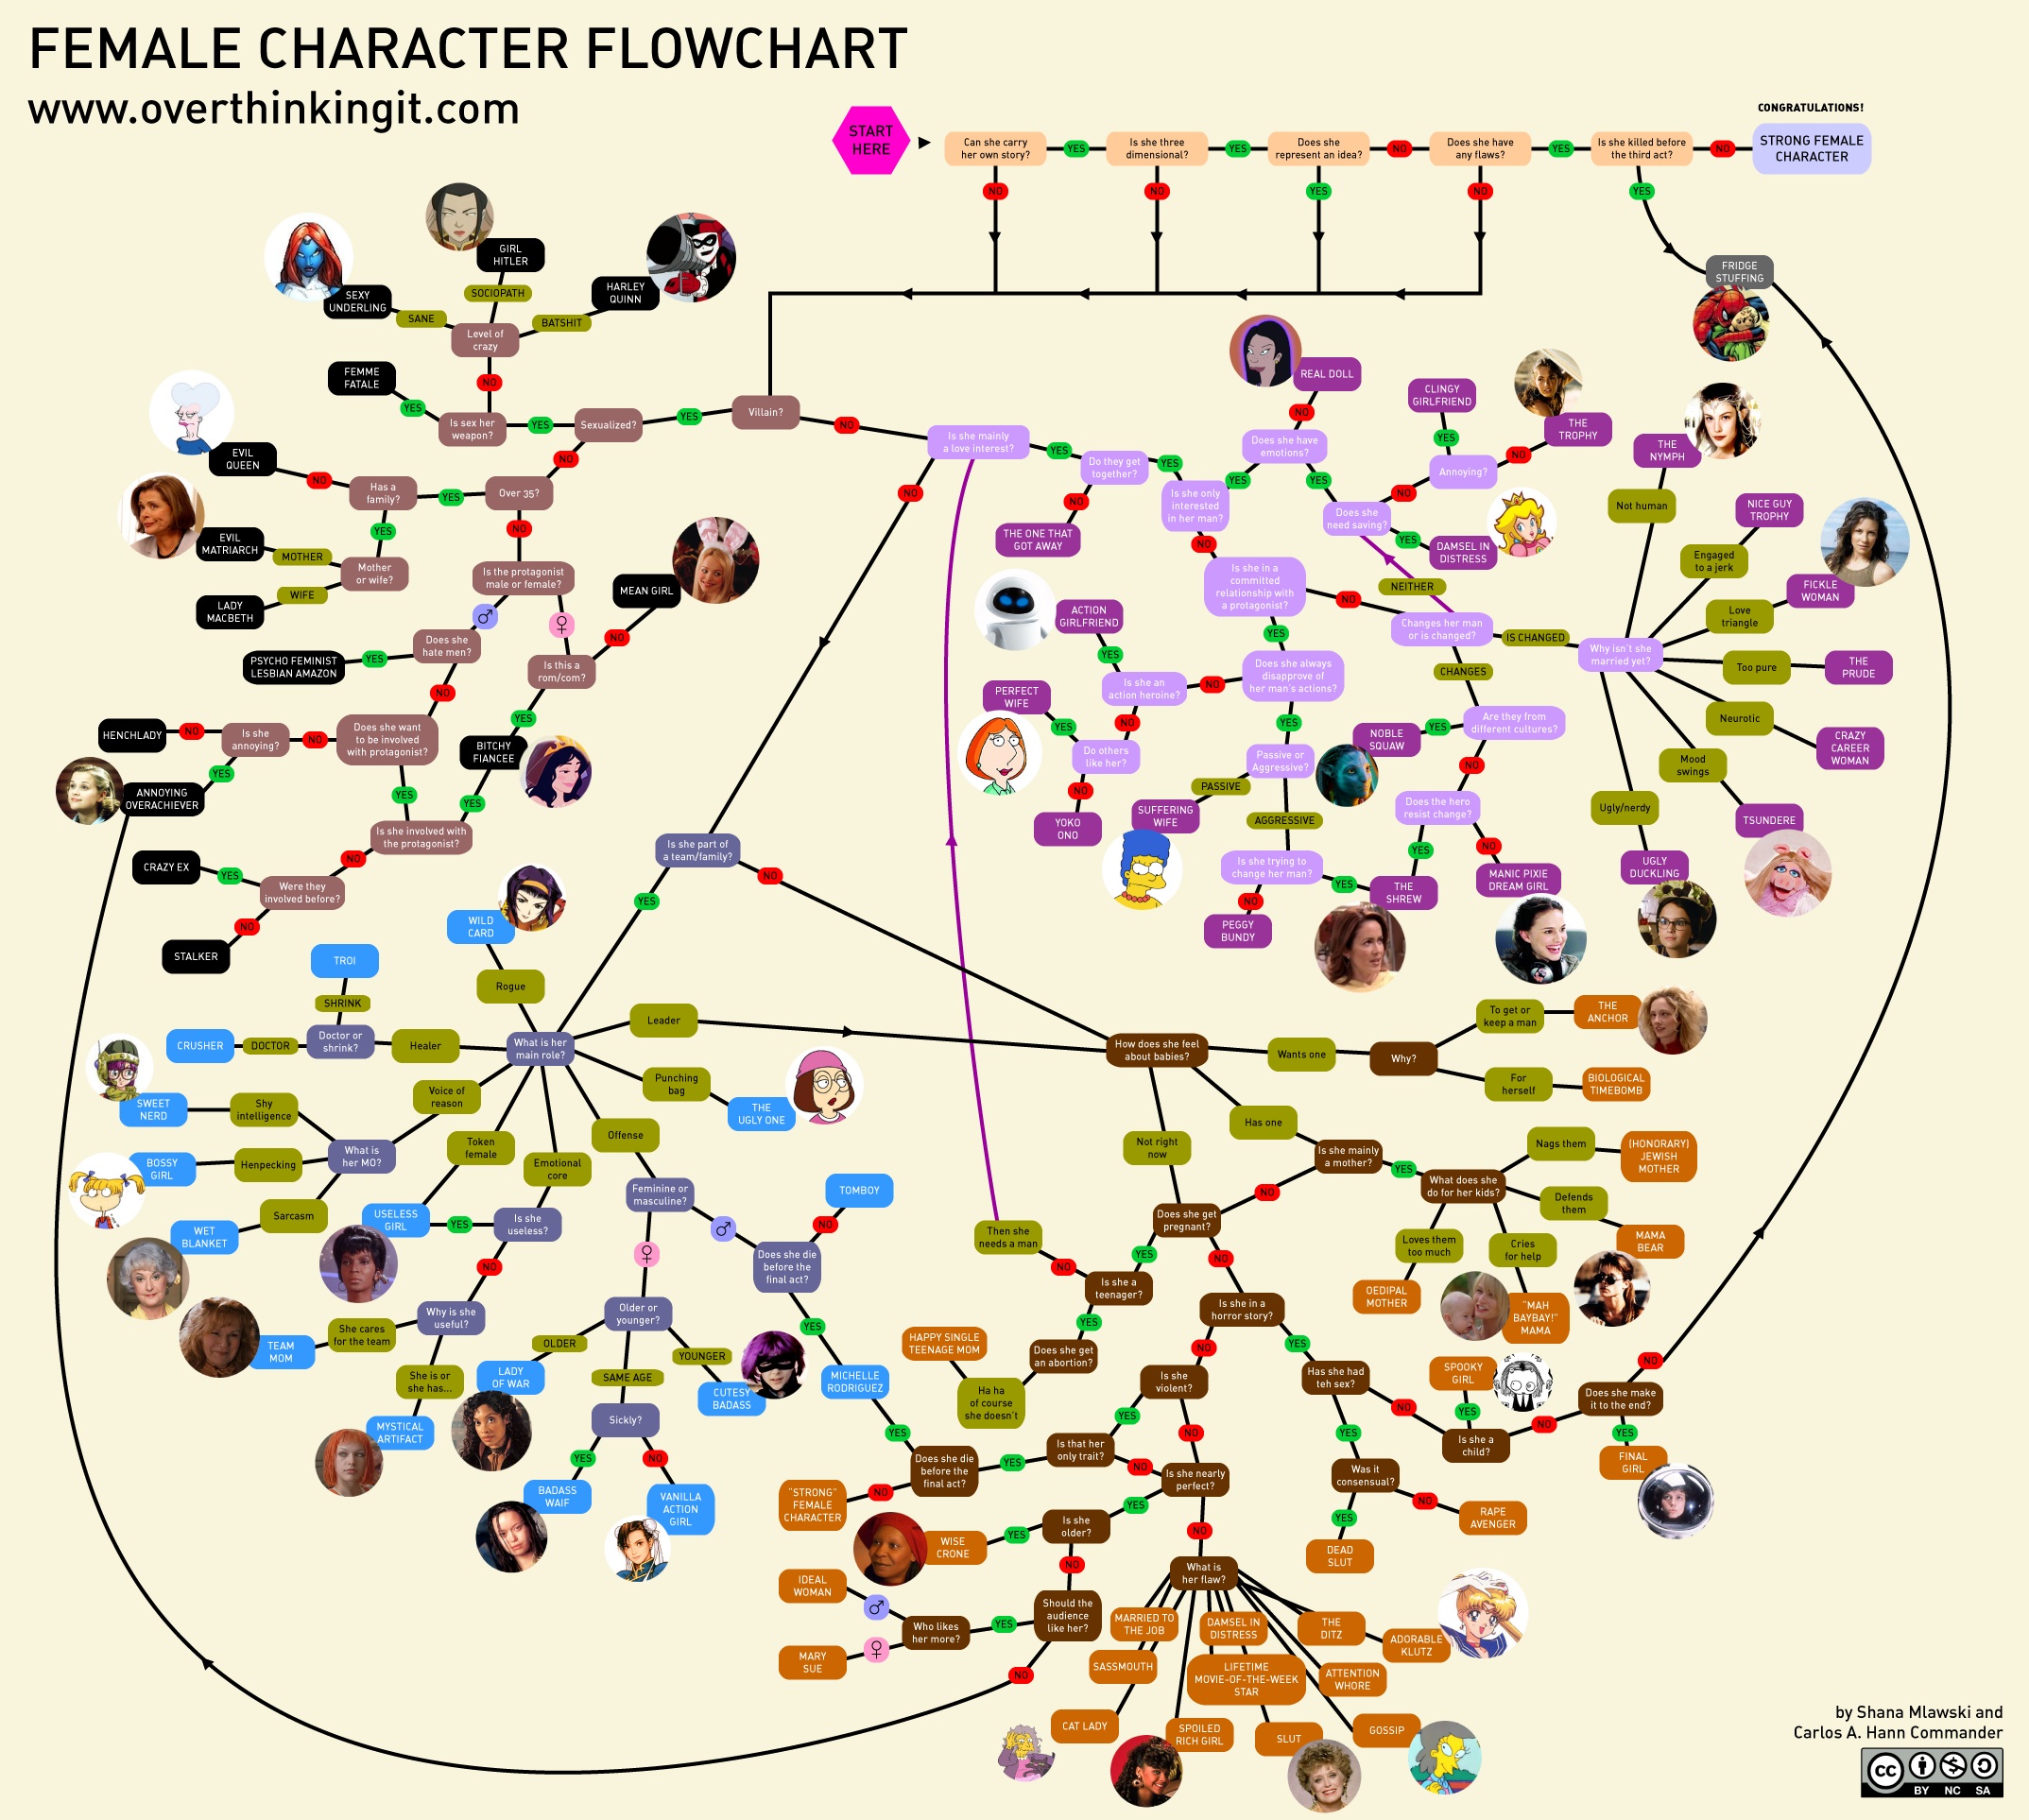 http://thesocietypages.org/socimages/files/2010/10/overthinking-it-female-character-flowchart_01.jpeg